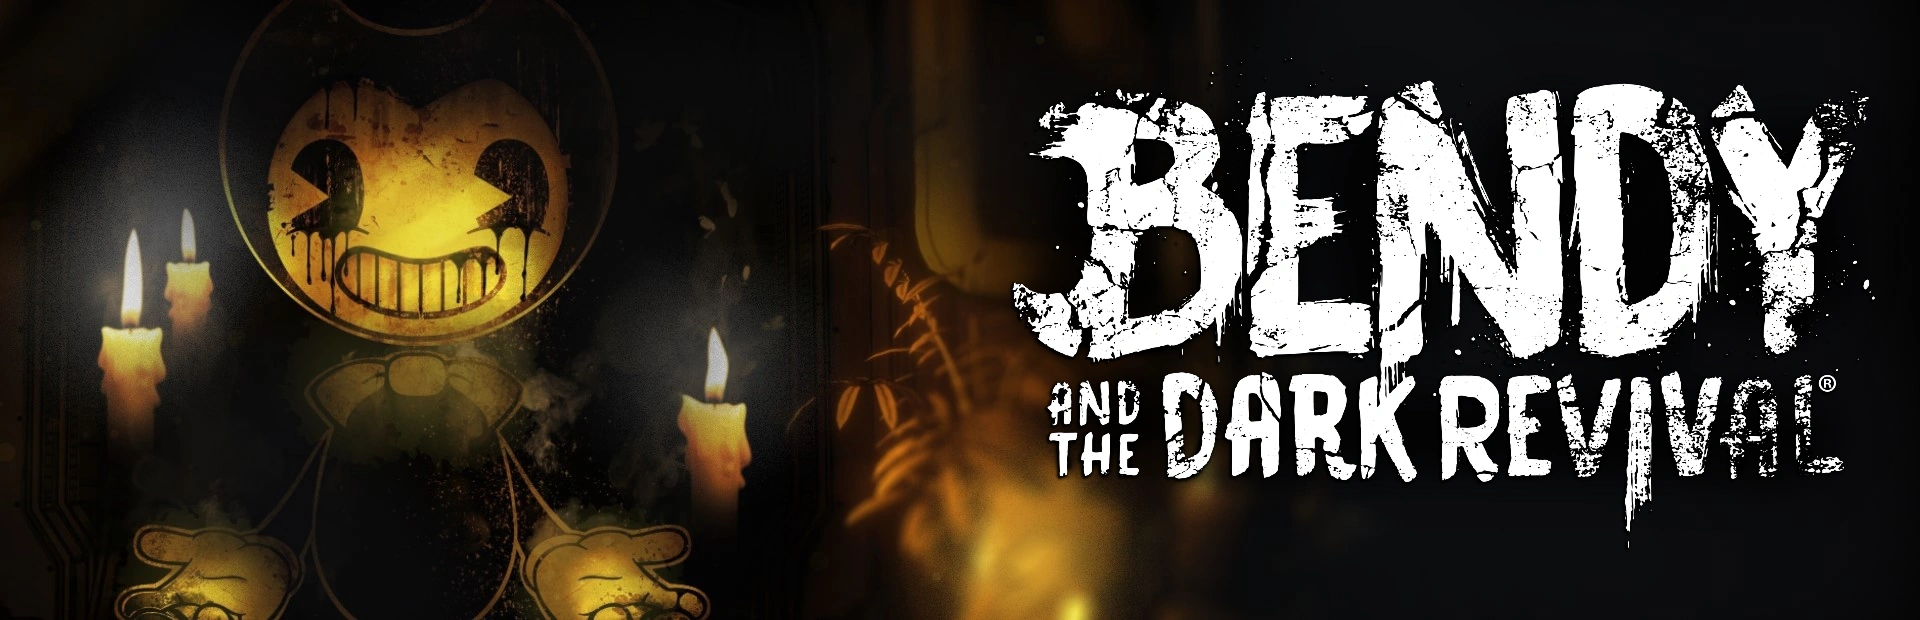 Bendy.and .the .Dark .Revival.banner2